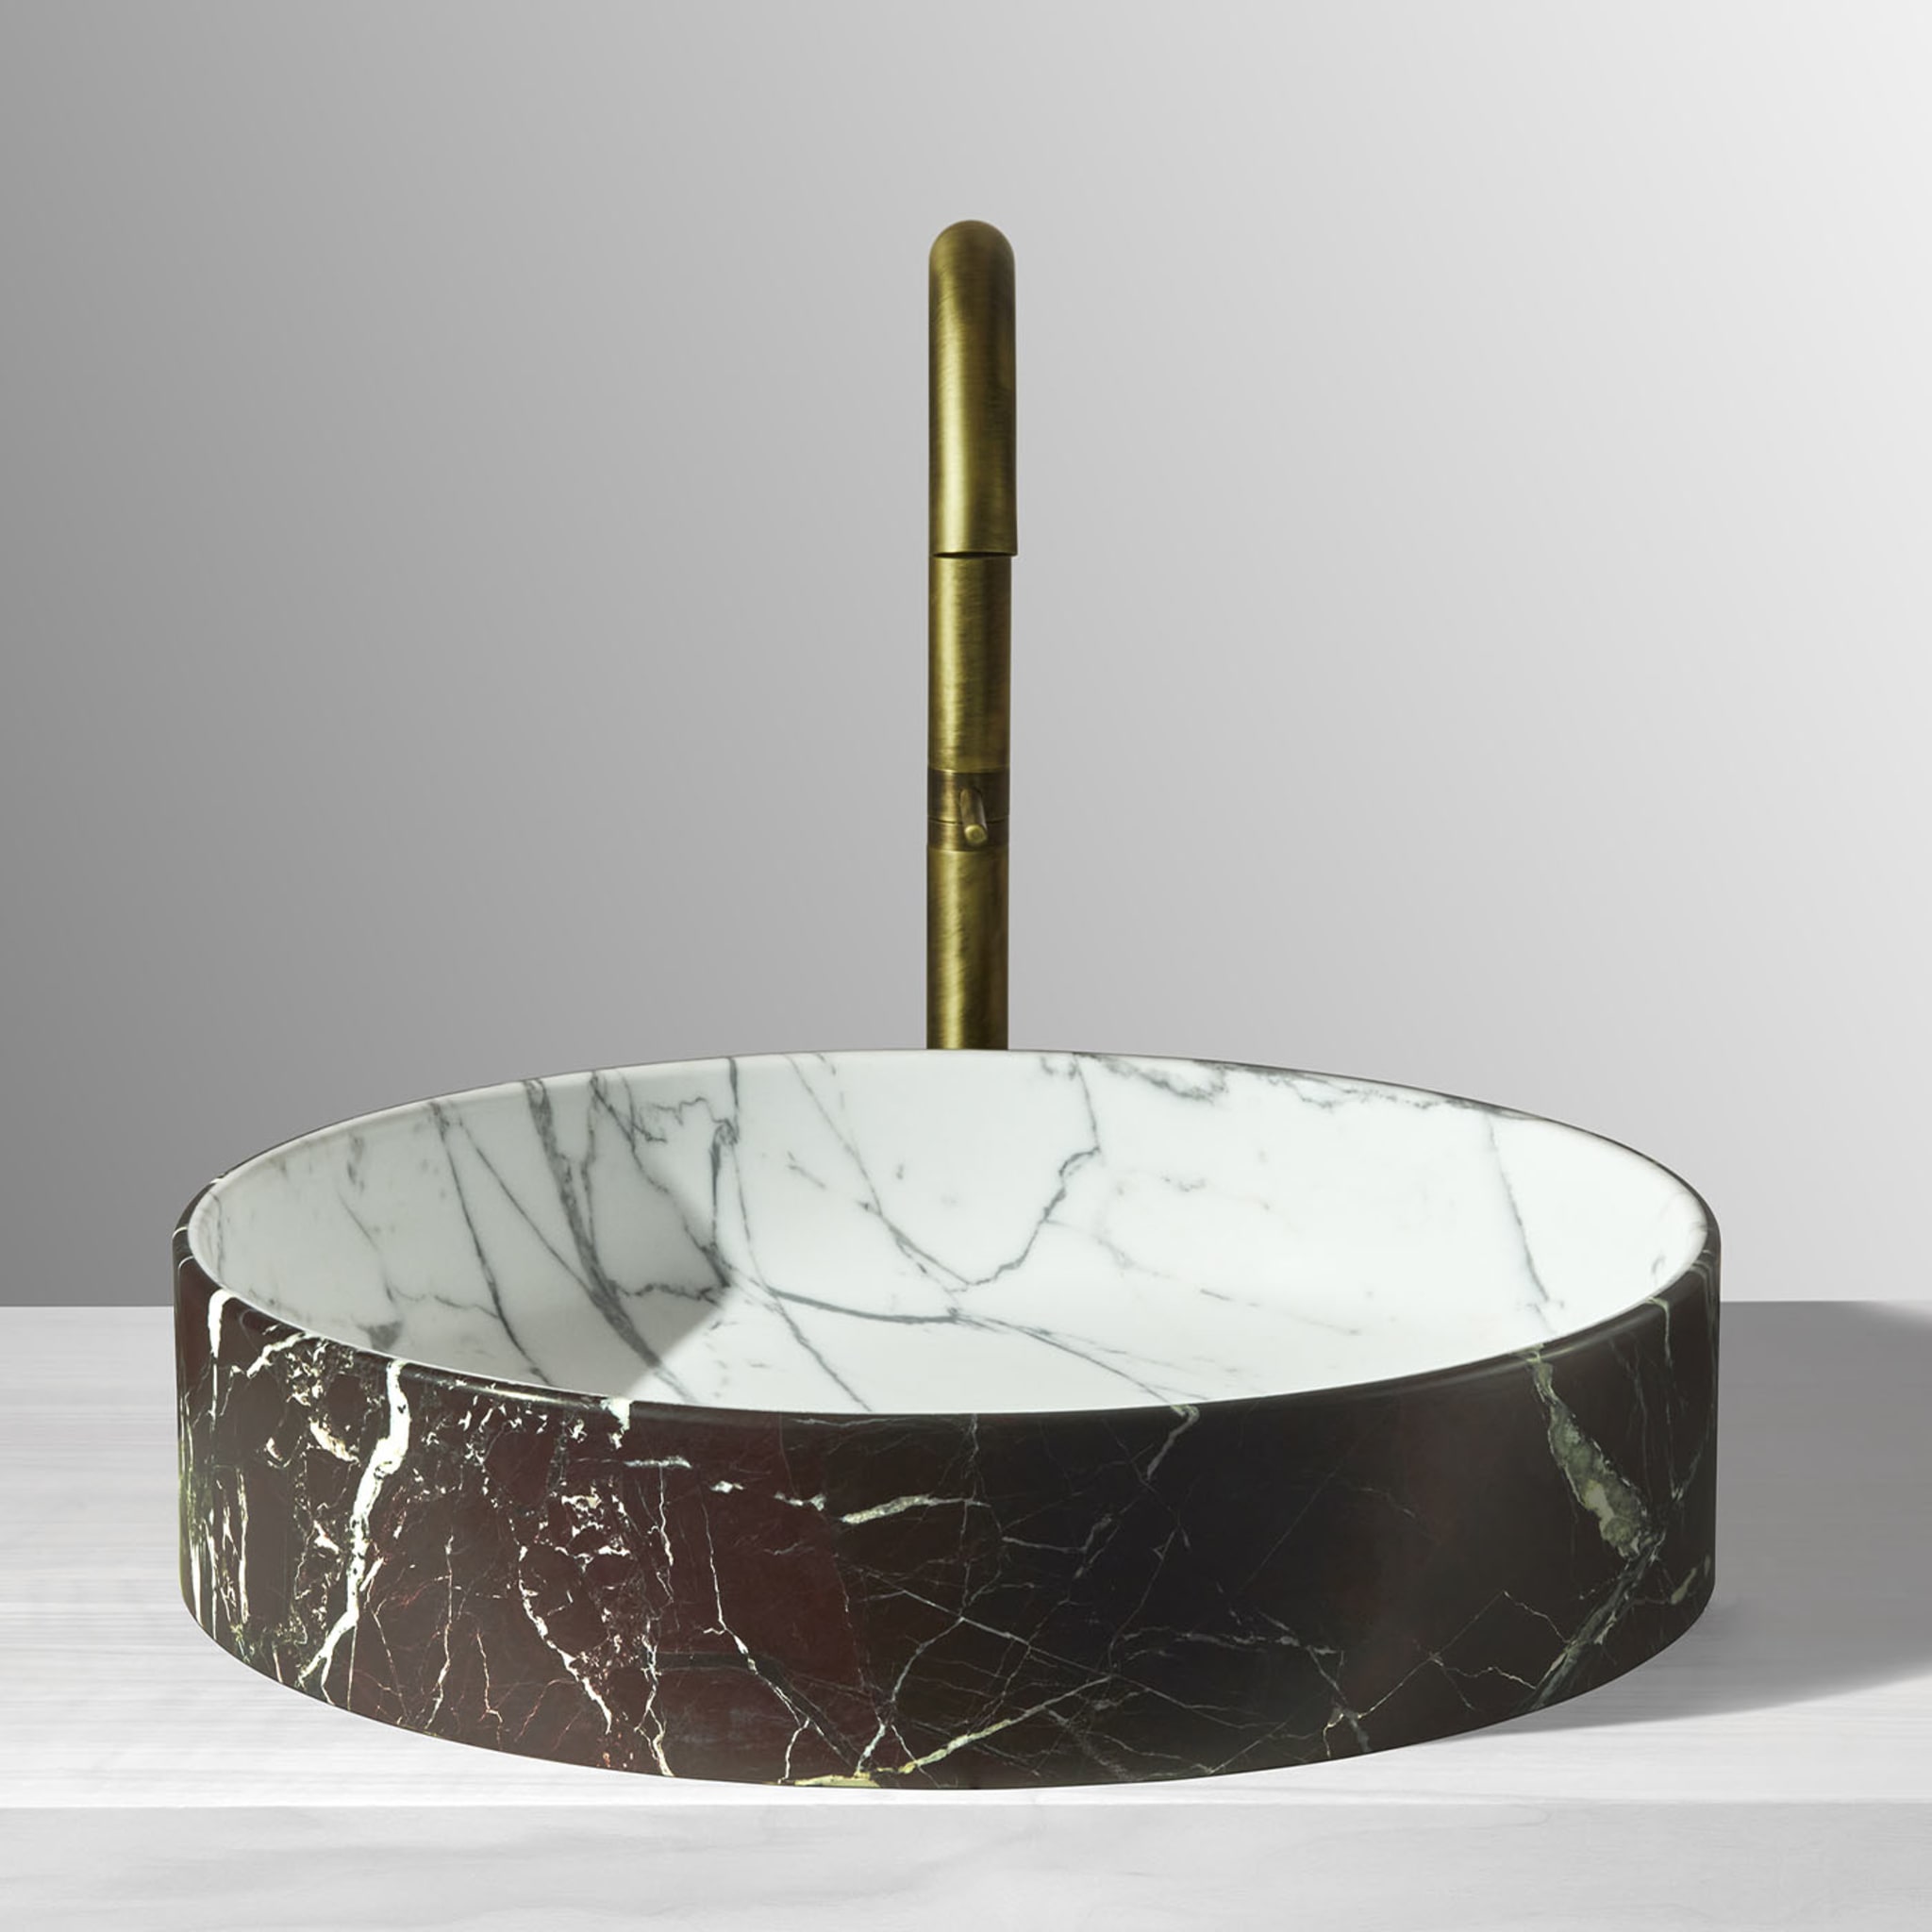 Blessed Round Washbasin by Christophe Pillet - Alternative view 1